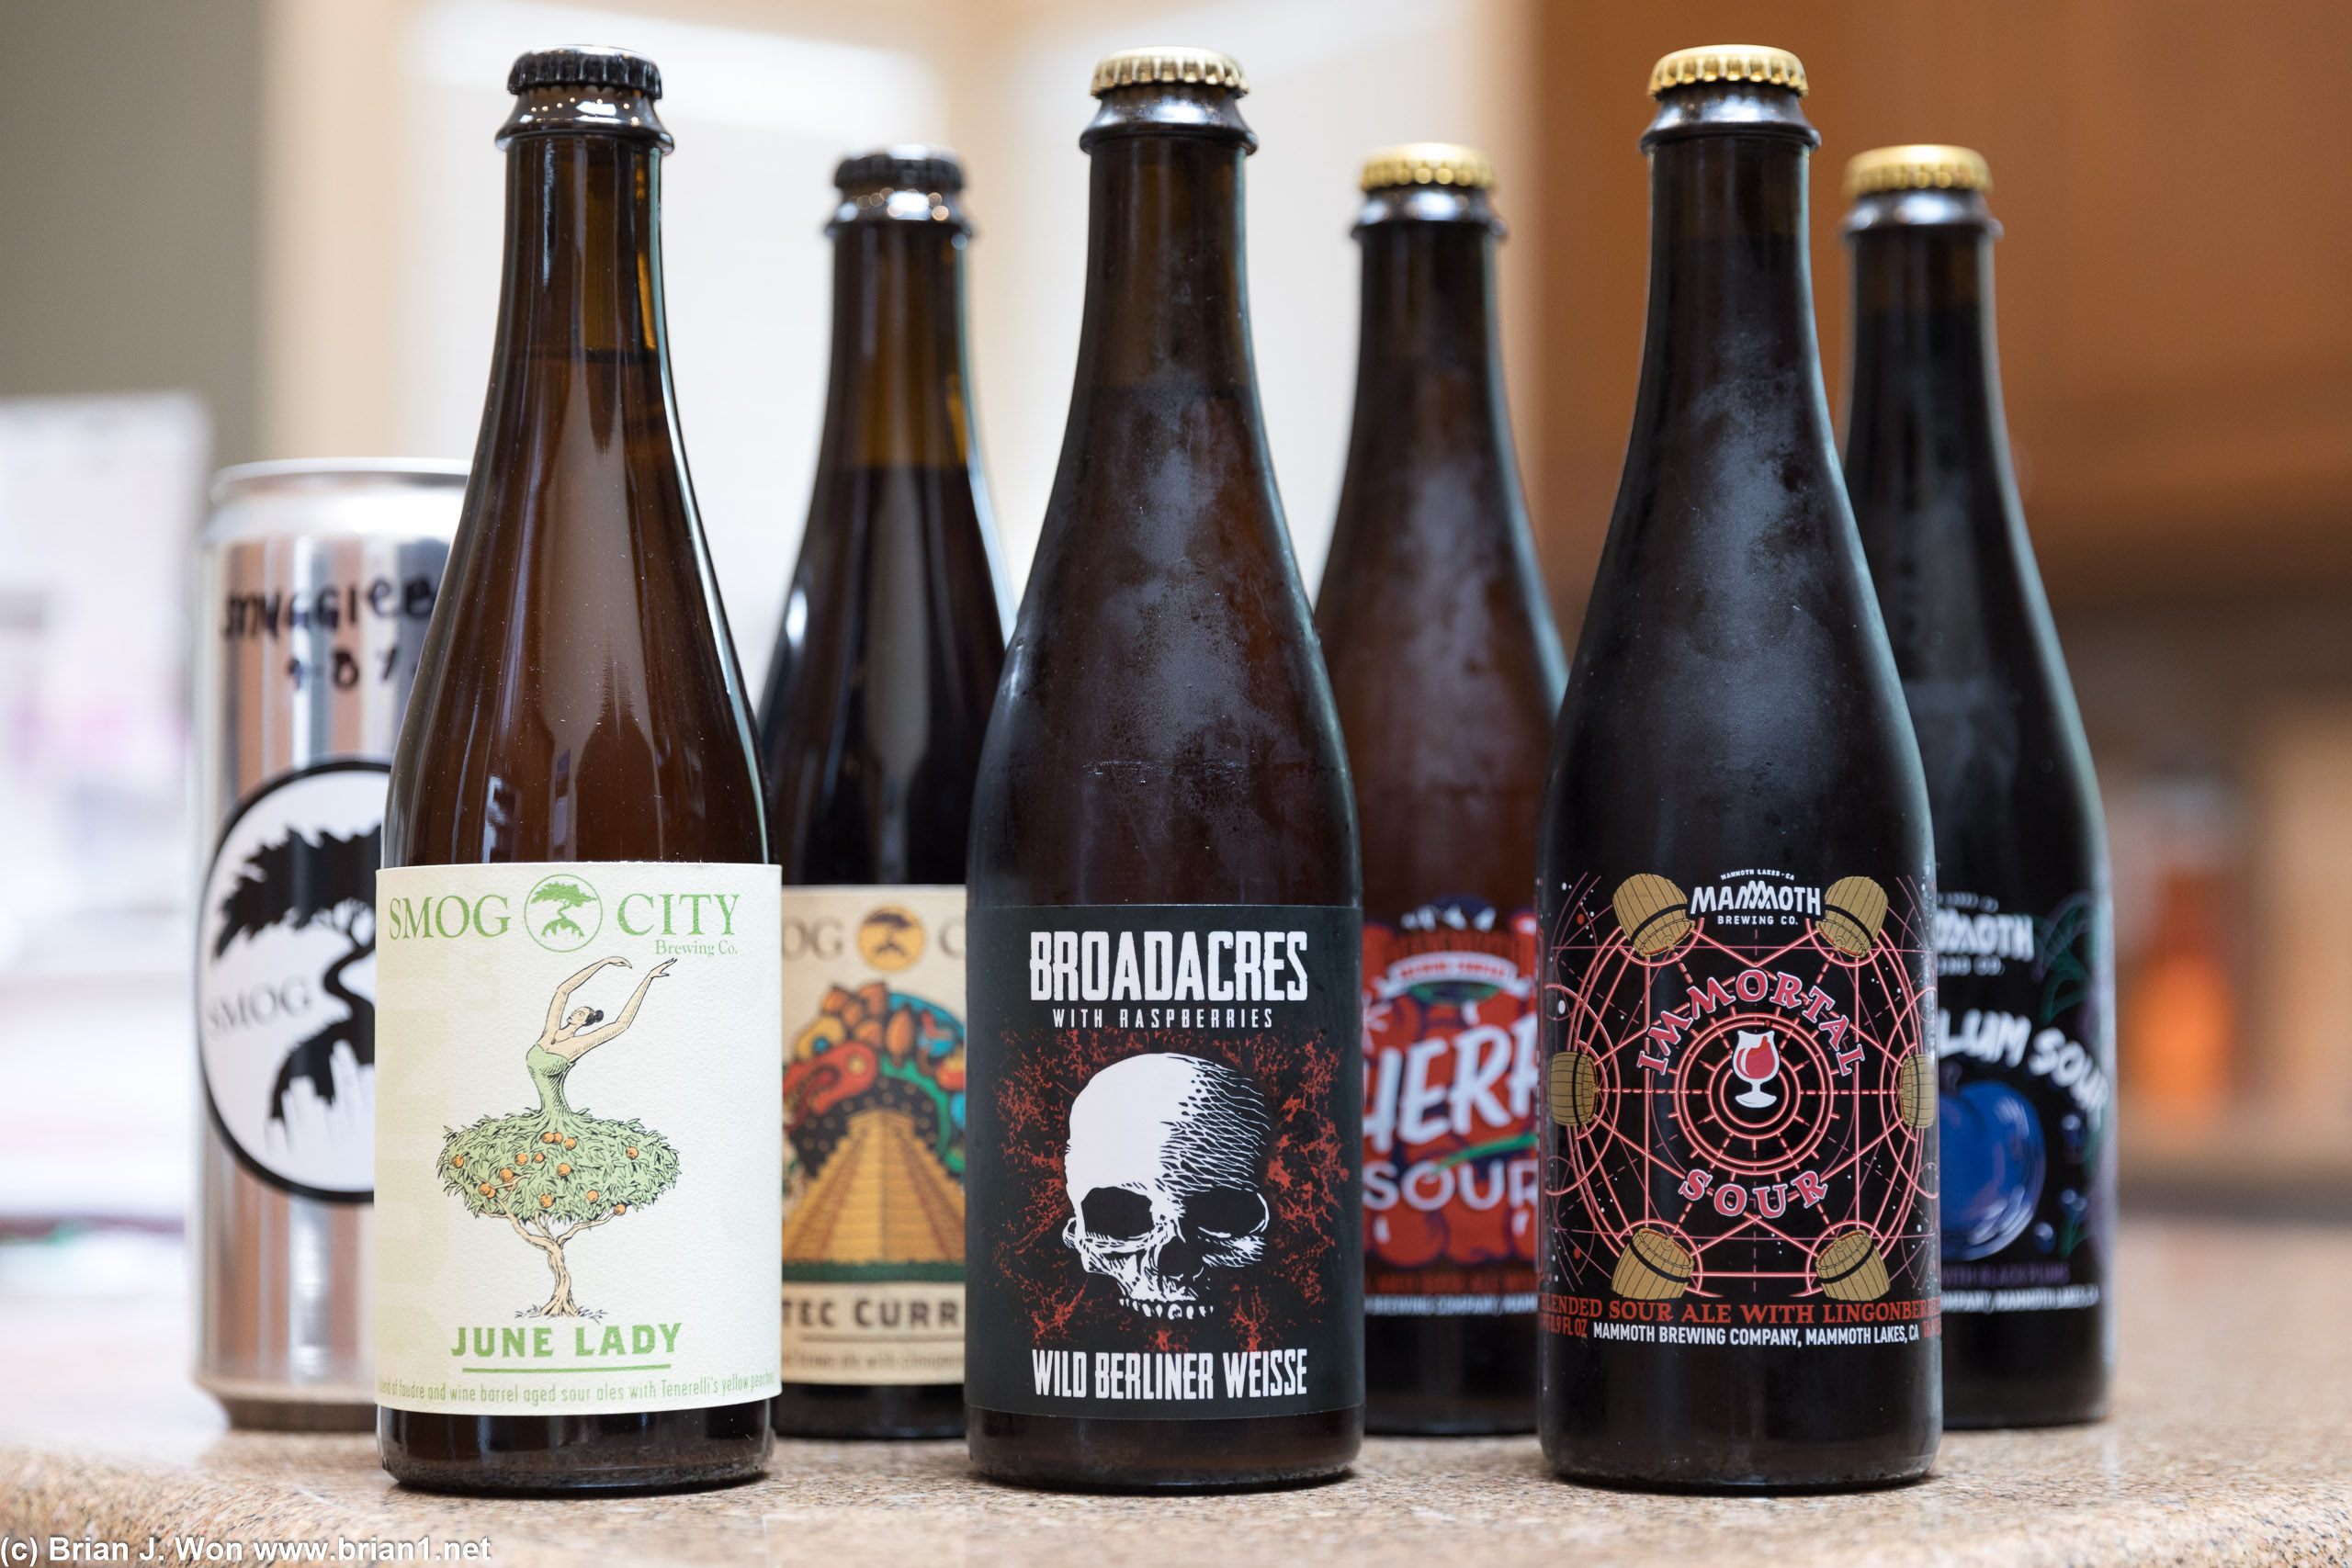 Sour beers from Smog City, Phantom Carriage, and Mammoth Brewing.